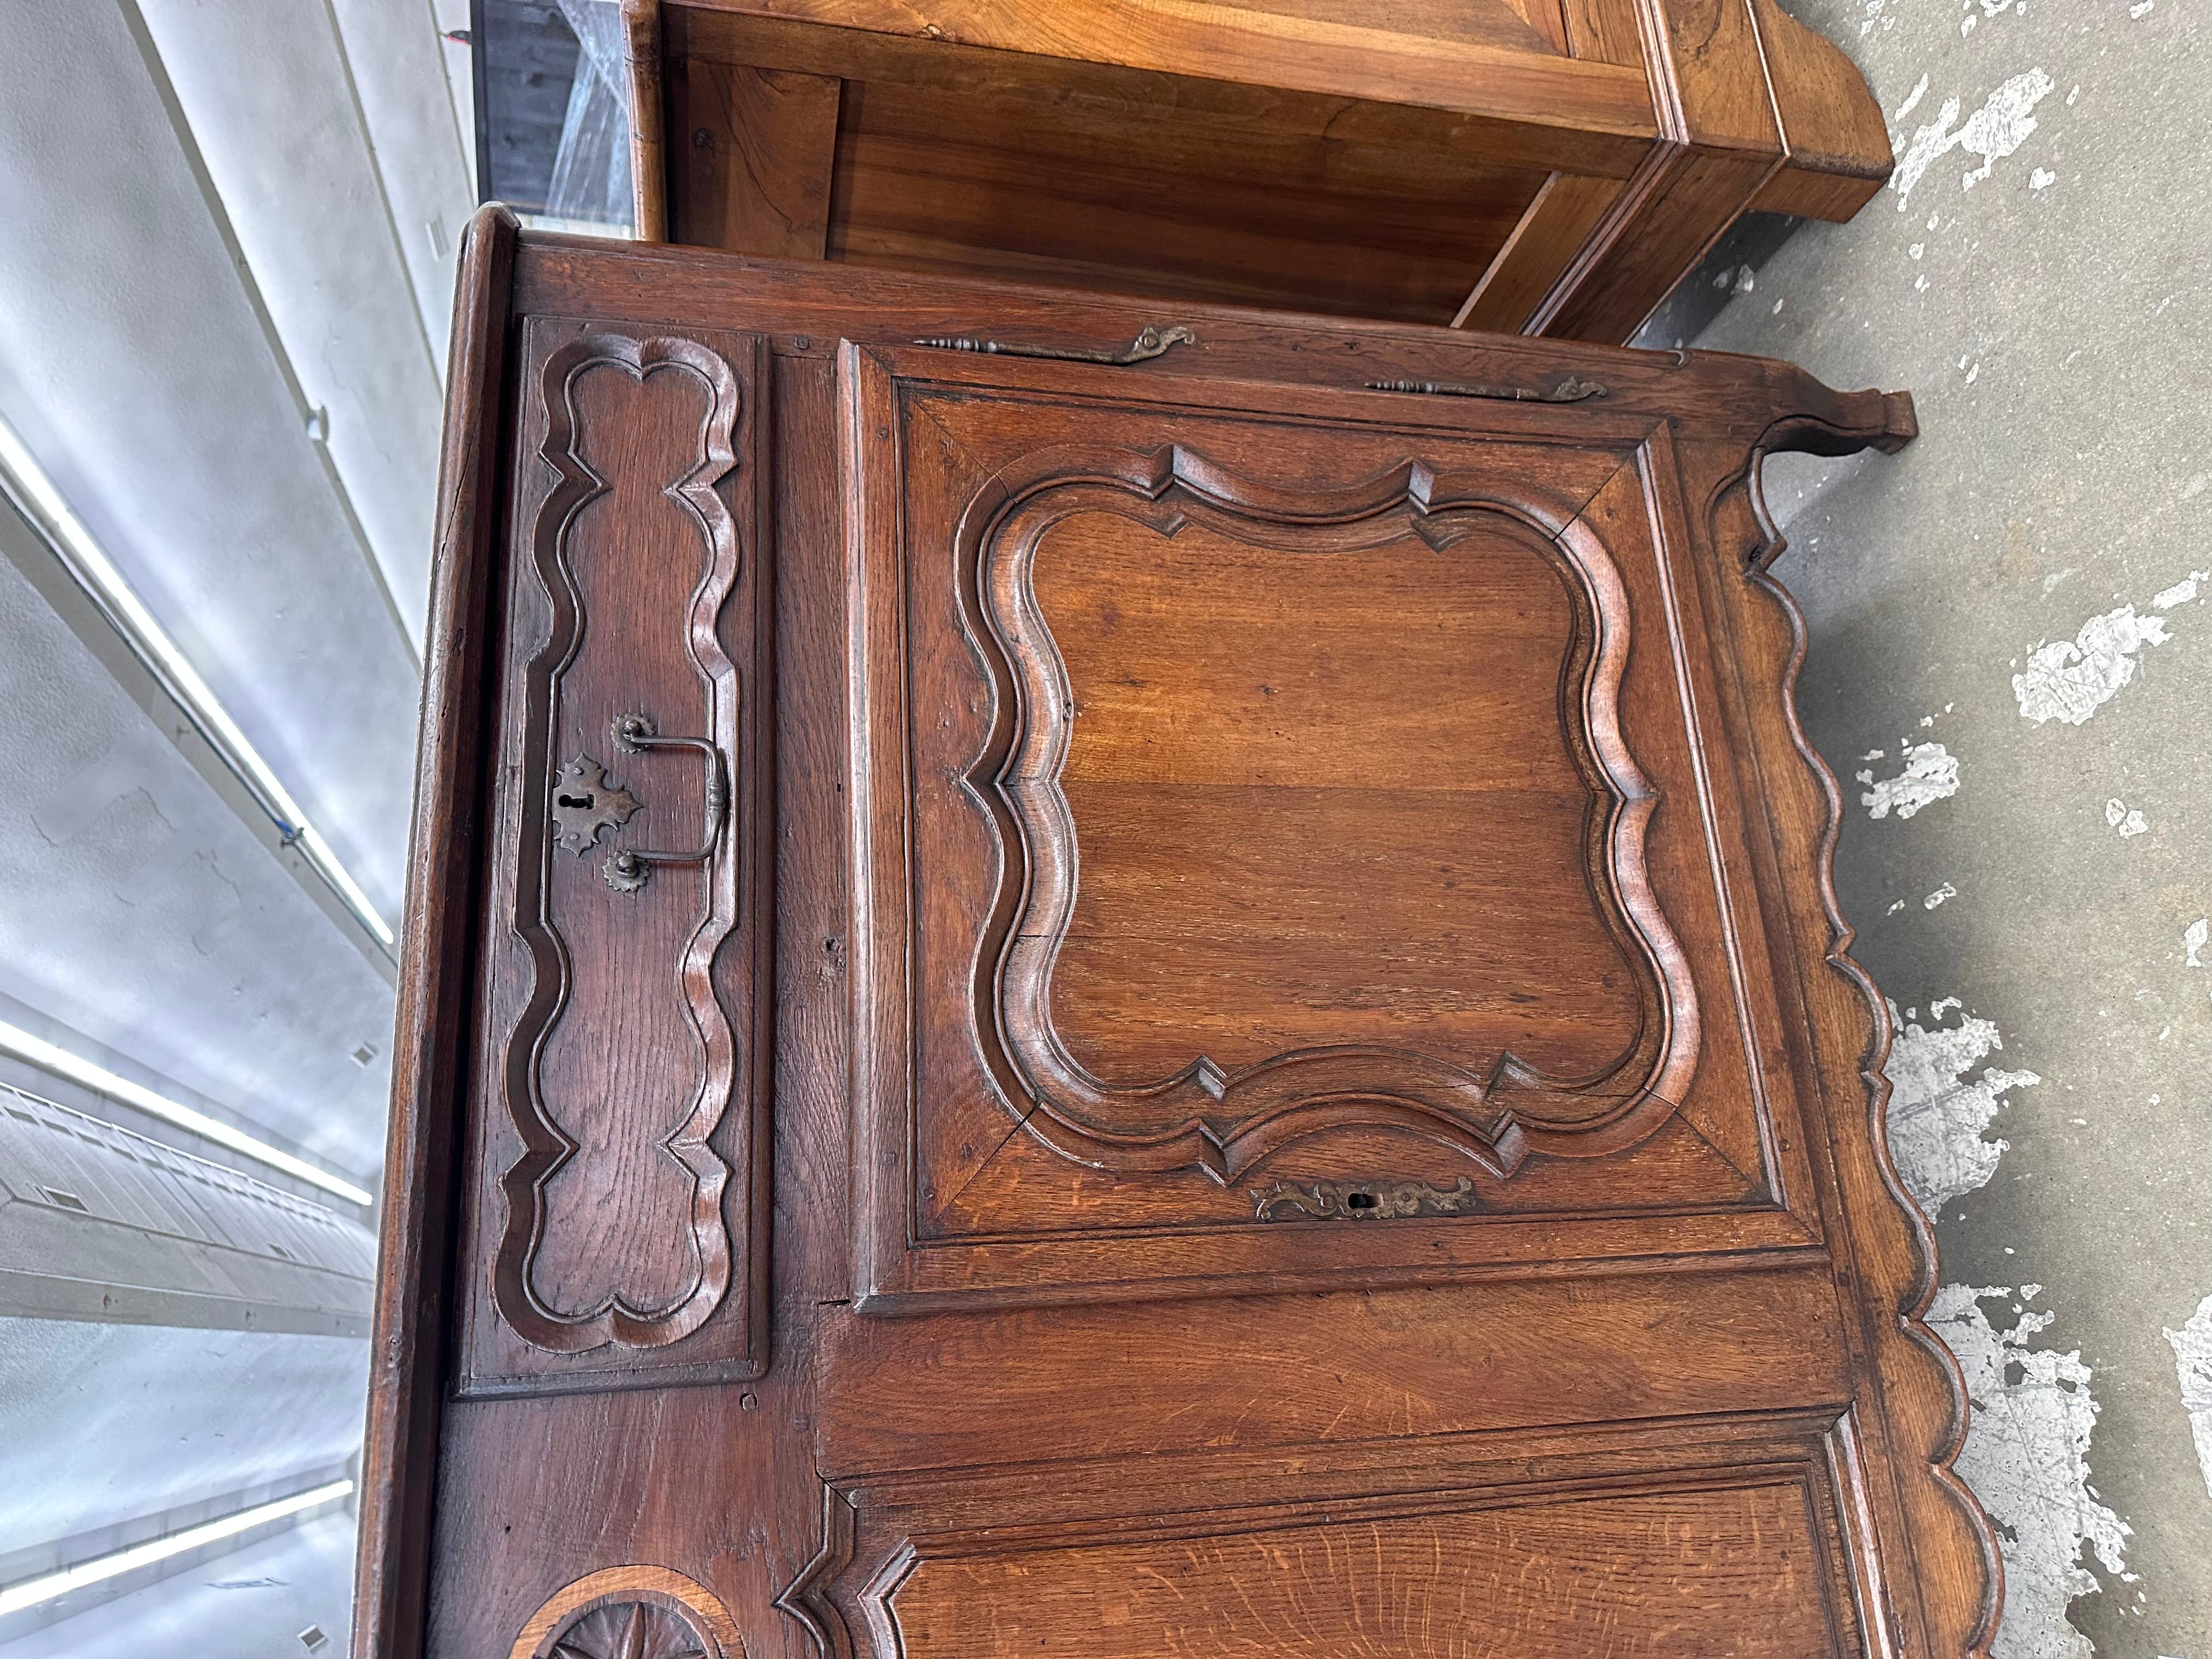 This is a truly stunning Louis XV period French Enfilade! Dating to the 1700s, this piece wears its age beautifully with an excellent patina. The front boasts such gorgeous handwork by the French craftsman as well has the iron workers that forged